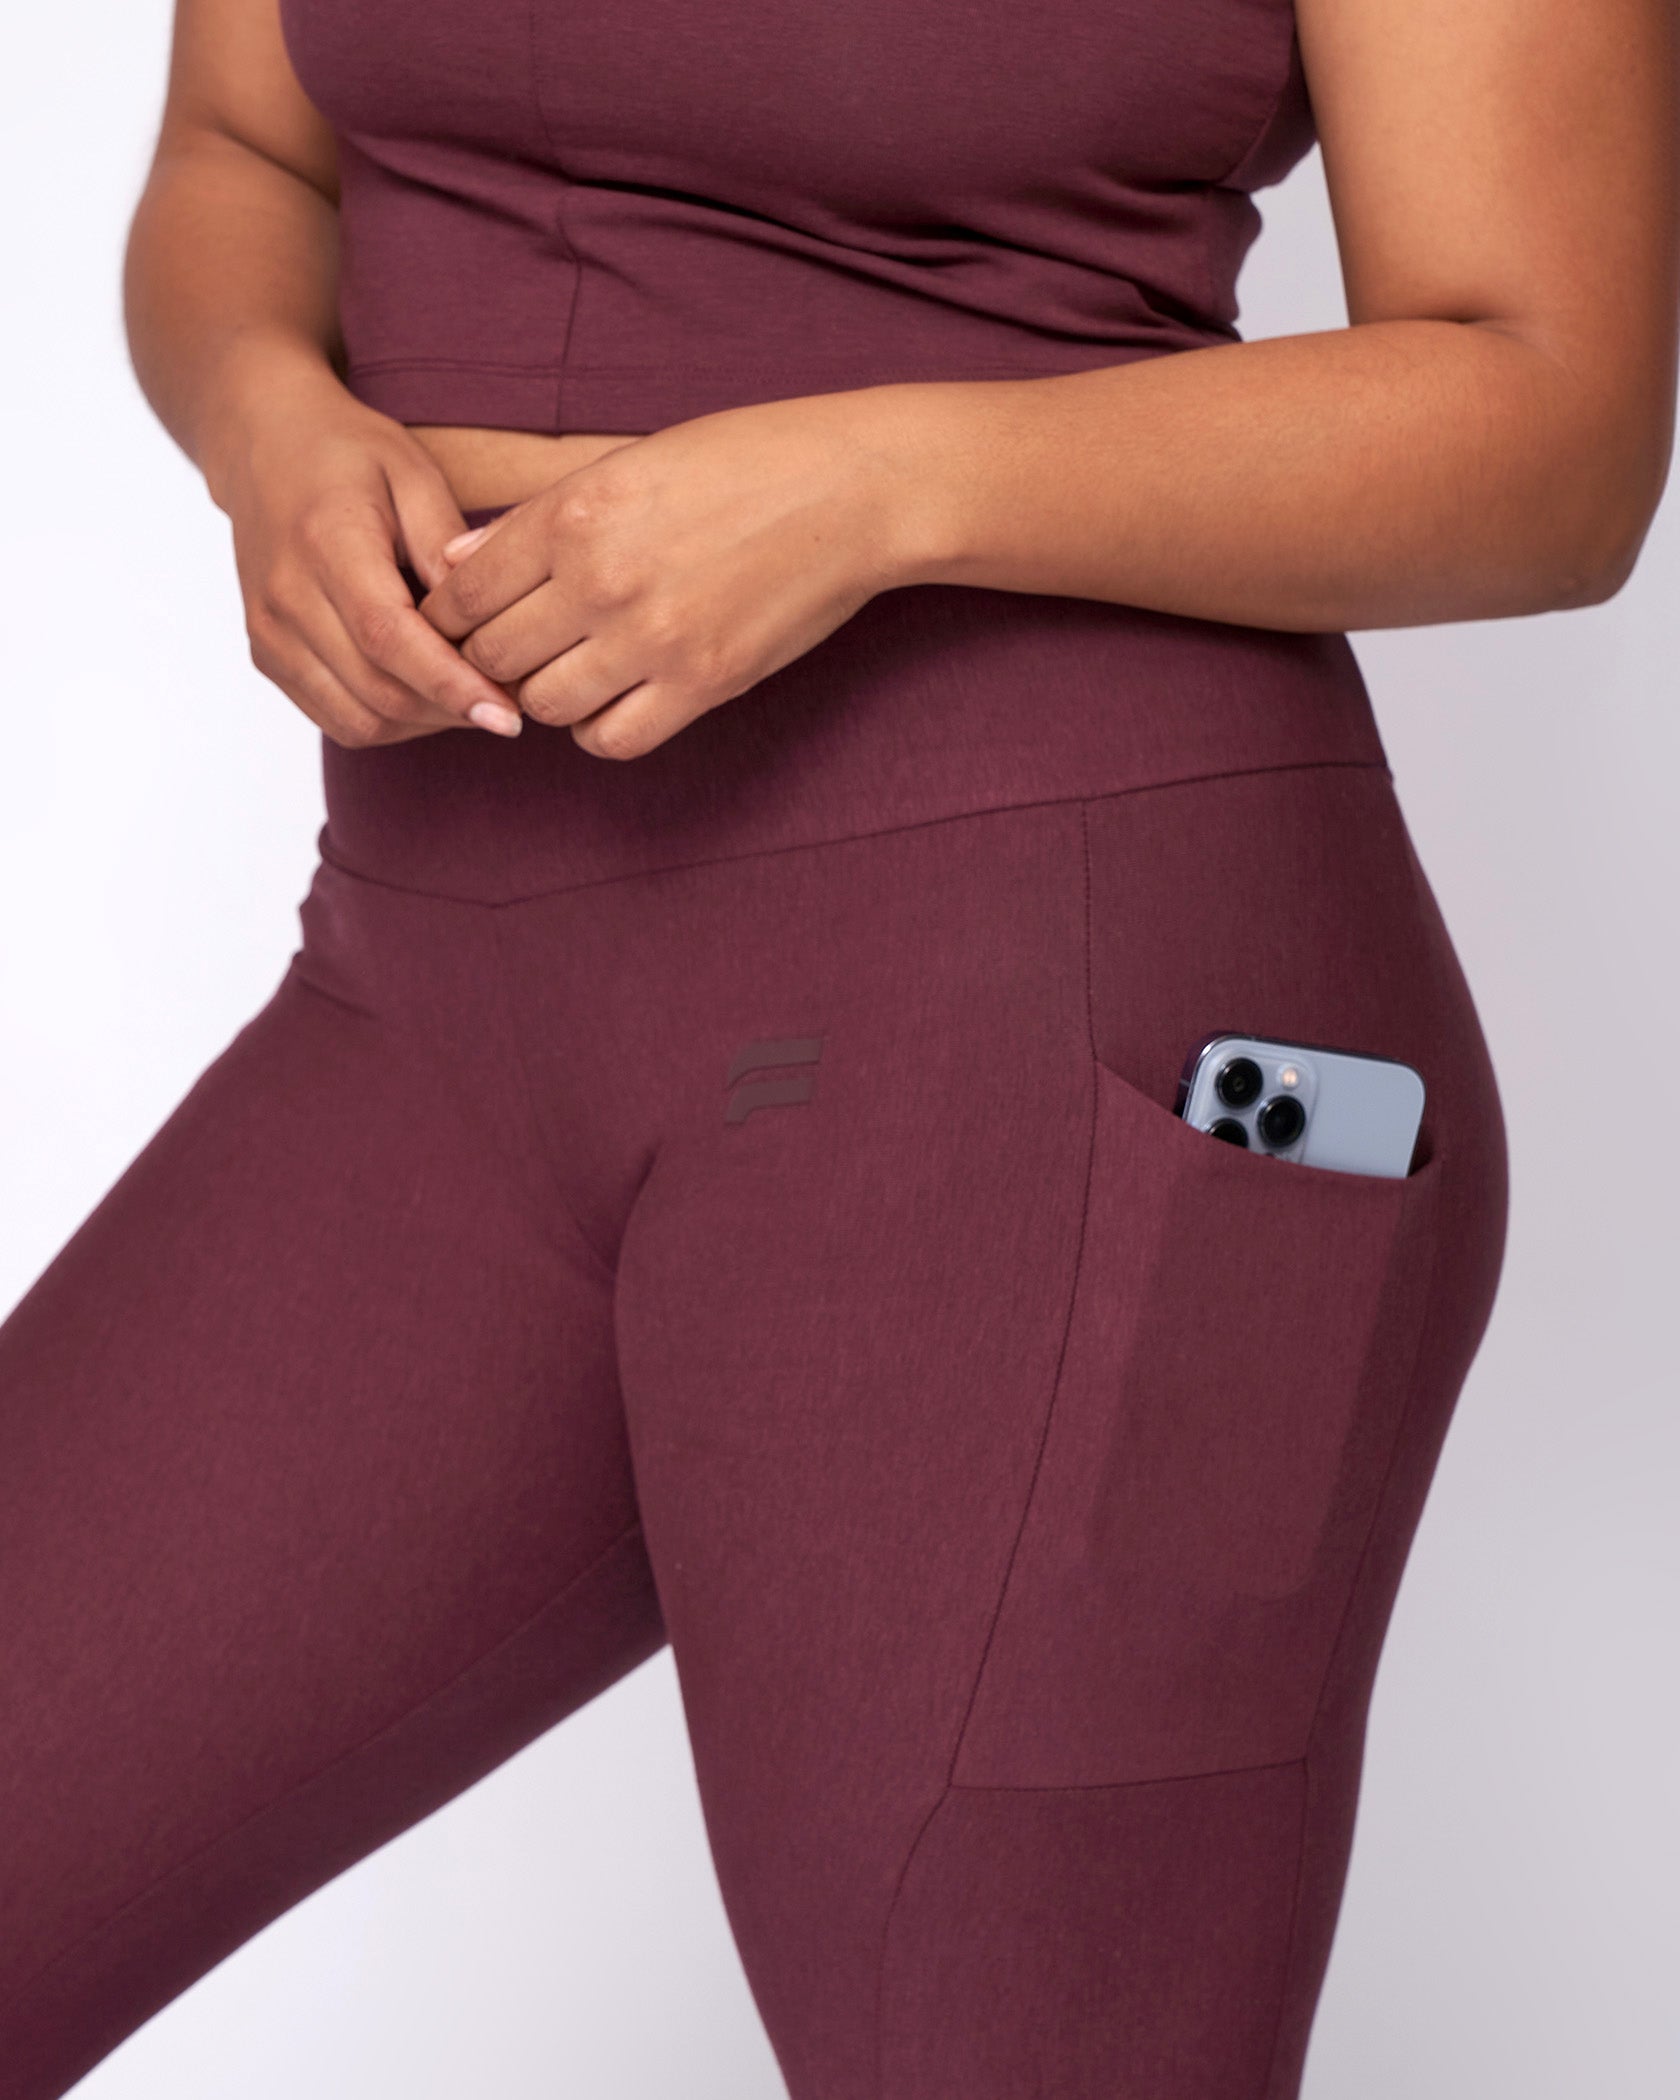 Fortify LX Tight - Bottoms - Reviews